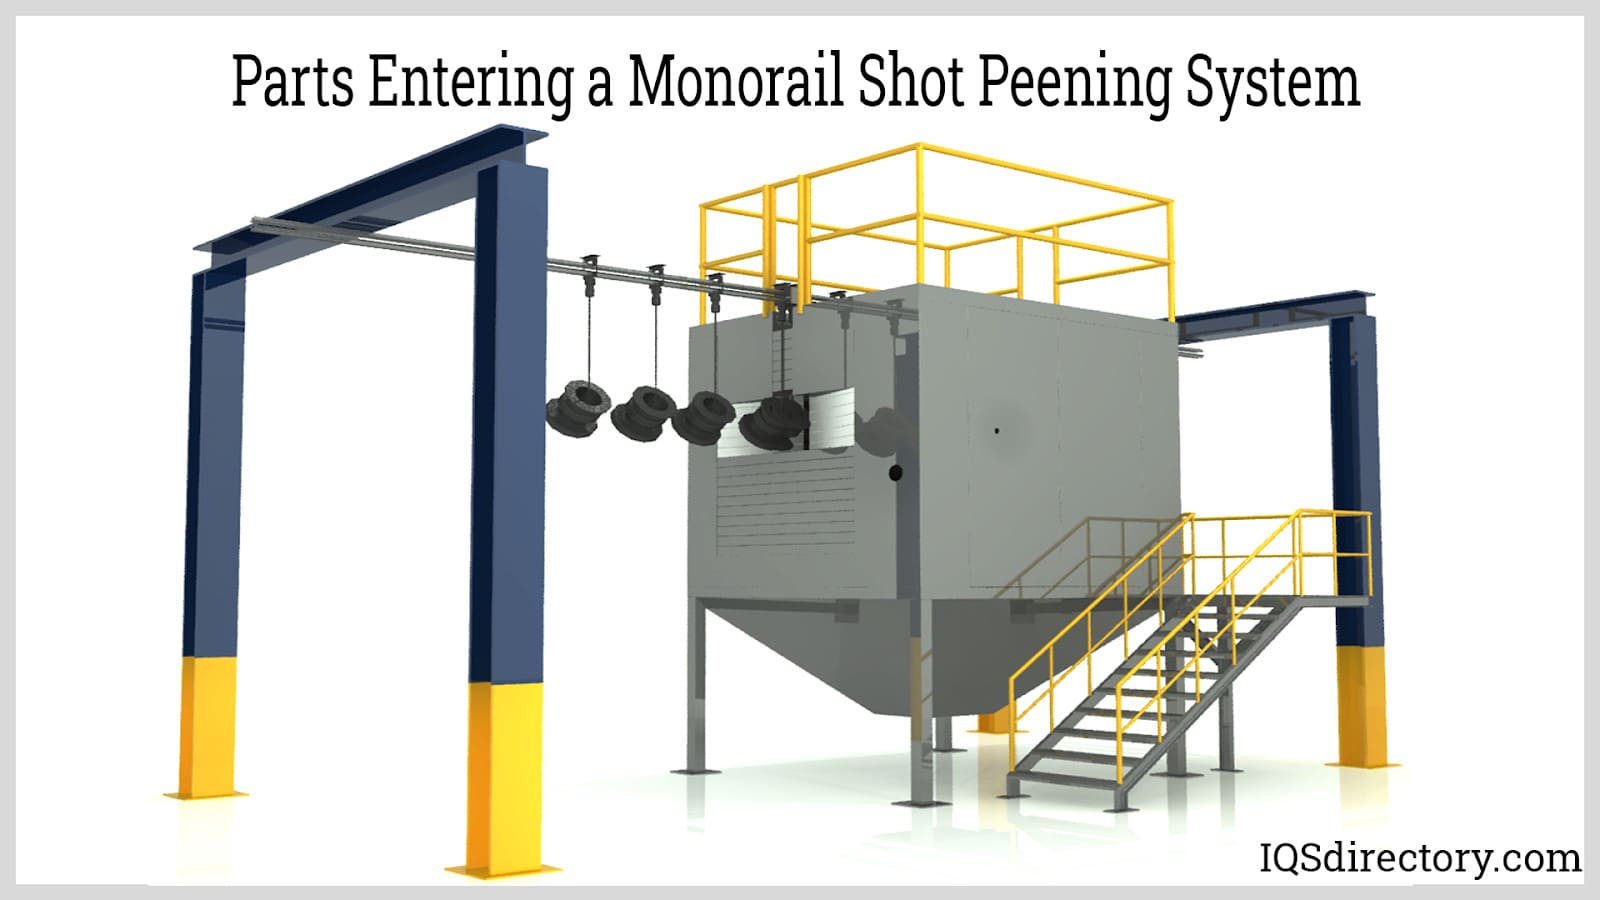 Parts Entering a Monorail Shot Peening System